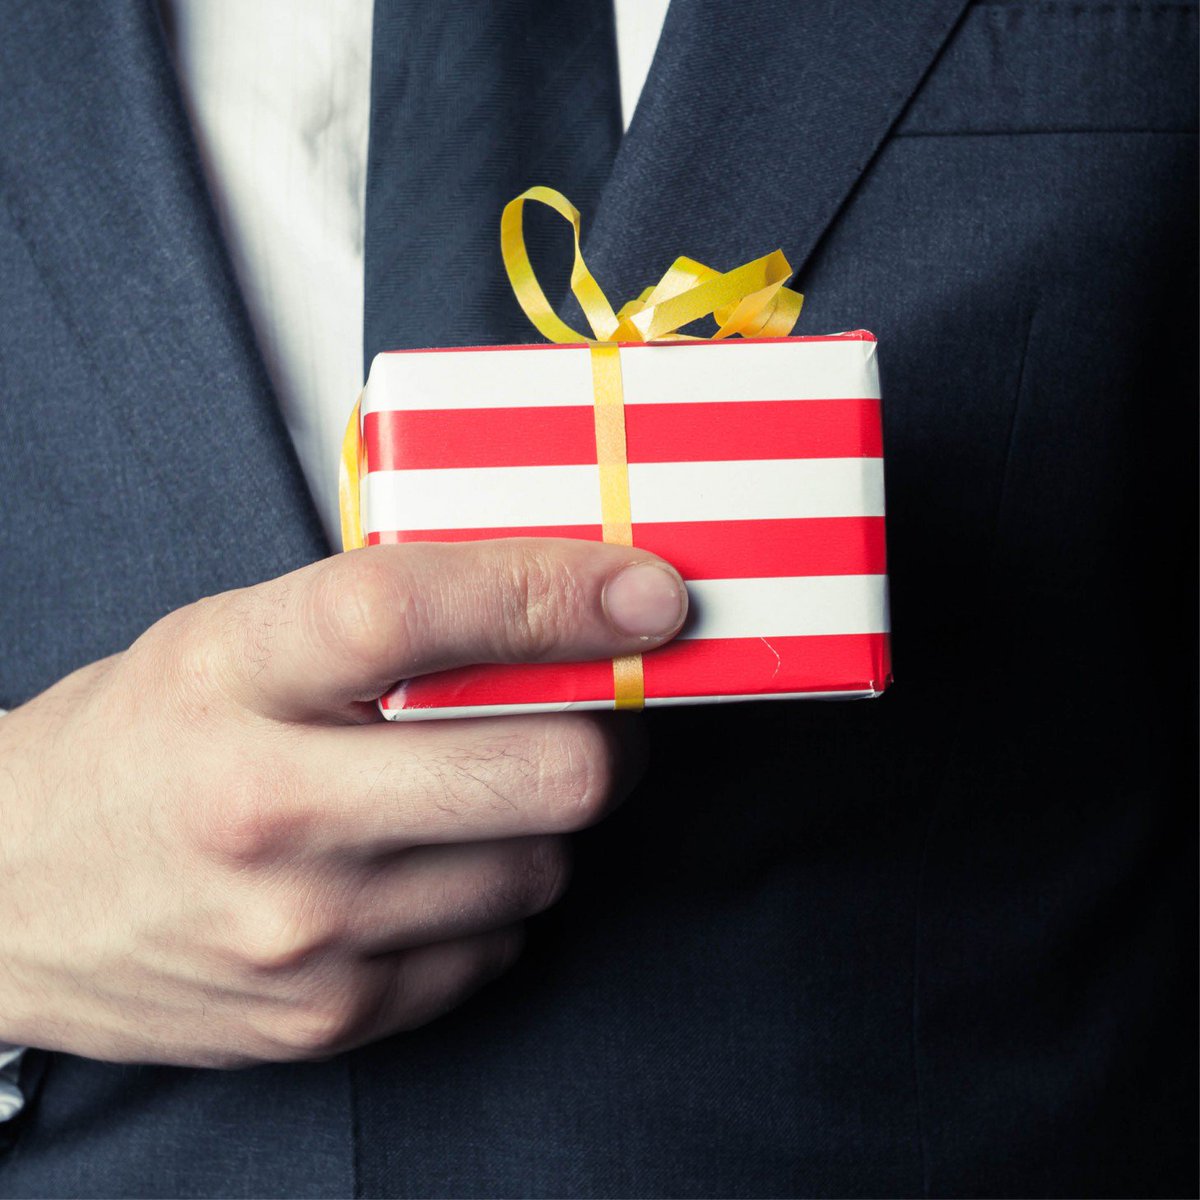 Tis the season for generosity and showing others our appreciation. Here are some pointers to make sure any present you give (or receive) follows proper business etiquette:
bit.ly/353SpX9

#GiftsfortheOffice #businessgifting #happyholidays